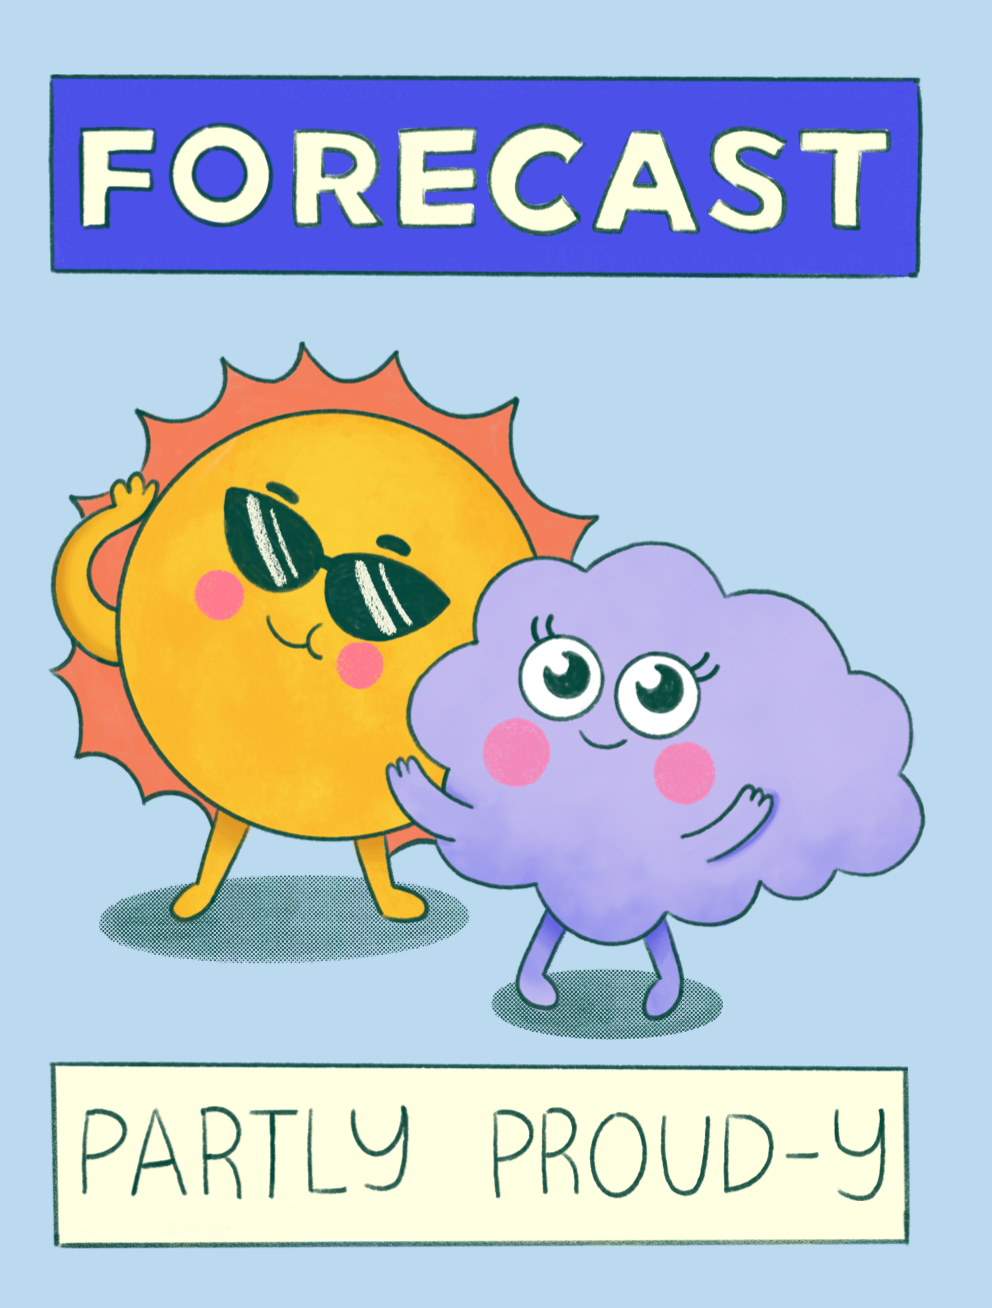 Forecast Partly Proud-y Card